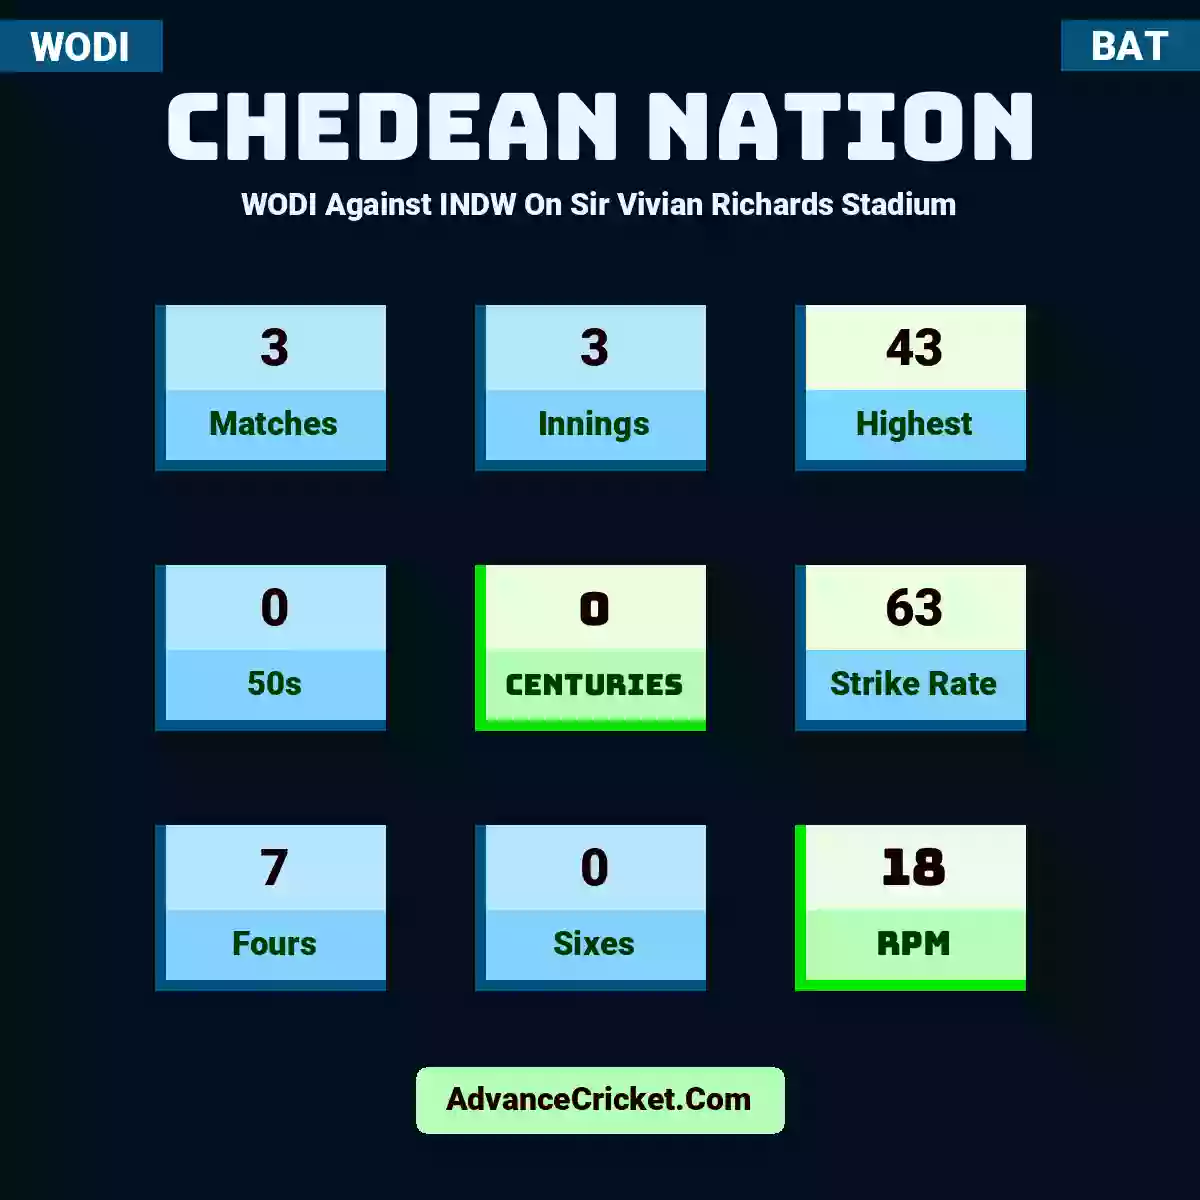 Chedean Nation WODI  Against INDW On Sir Vivian Richards Stadium, Chedean Nation played 3 matches, scored 43 runs as highest, 0 half-centuries, and 0 centuries, with a strike rate of 63. C.Nation hit 7 fours and 0 sixes, with an RPM of 18.